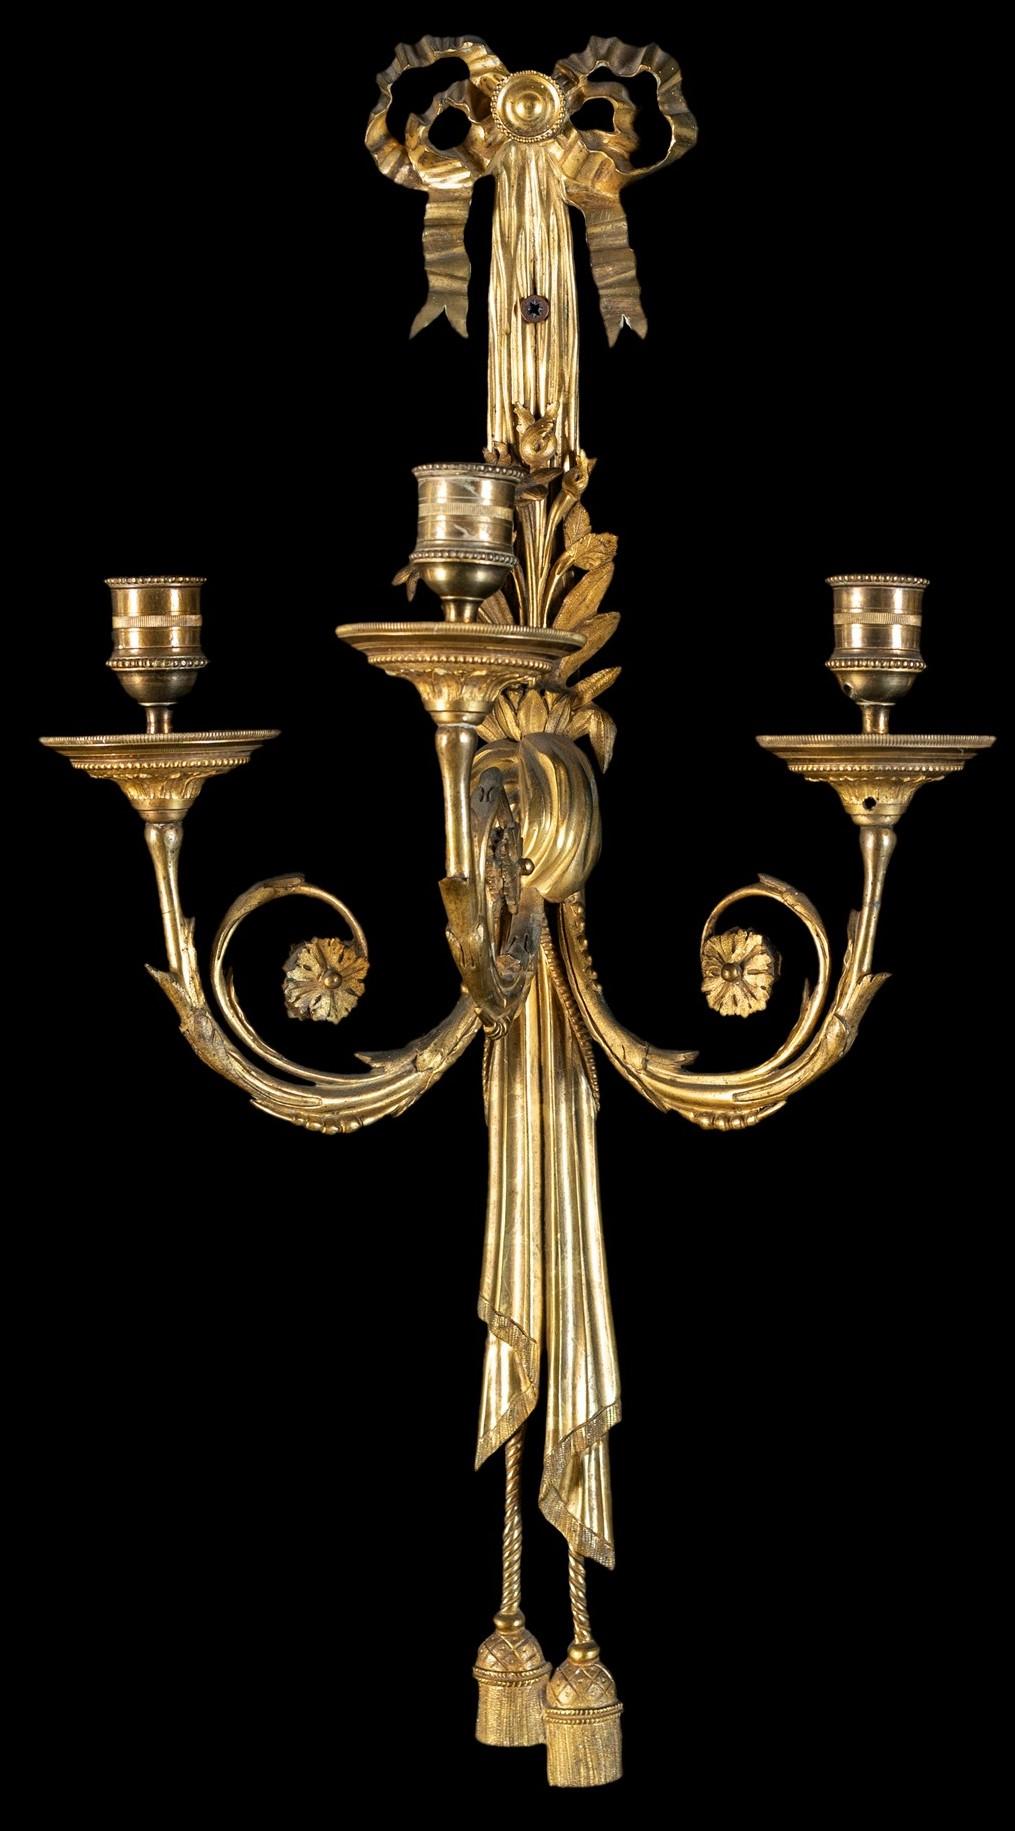 19th century, pair of French gilt bronze three-light sconces

This elegant pair of wall lamps was made in France in the early 19th century.
The wall lamps are in gilded bronze finely chiseled in the Louis XVI style. The central covering appears